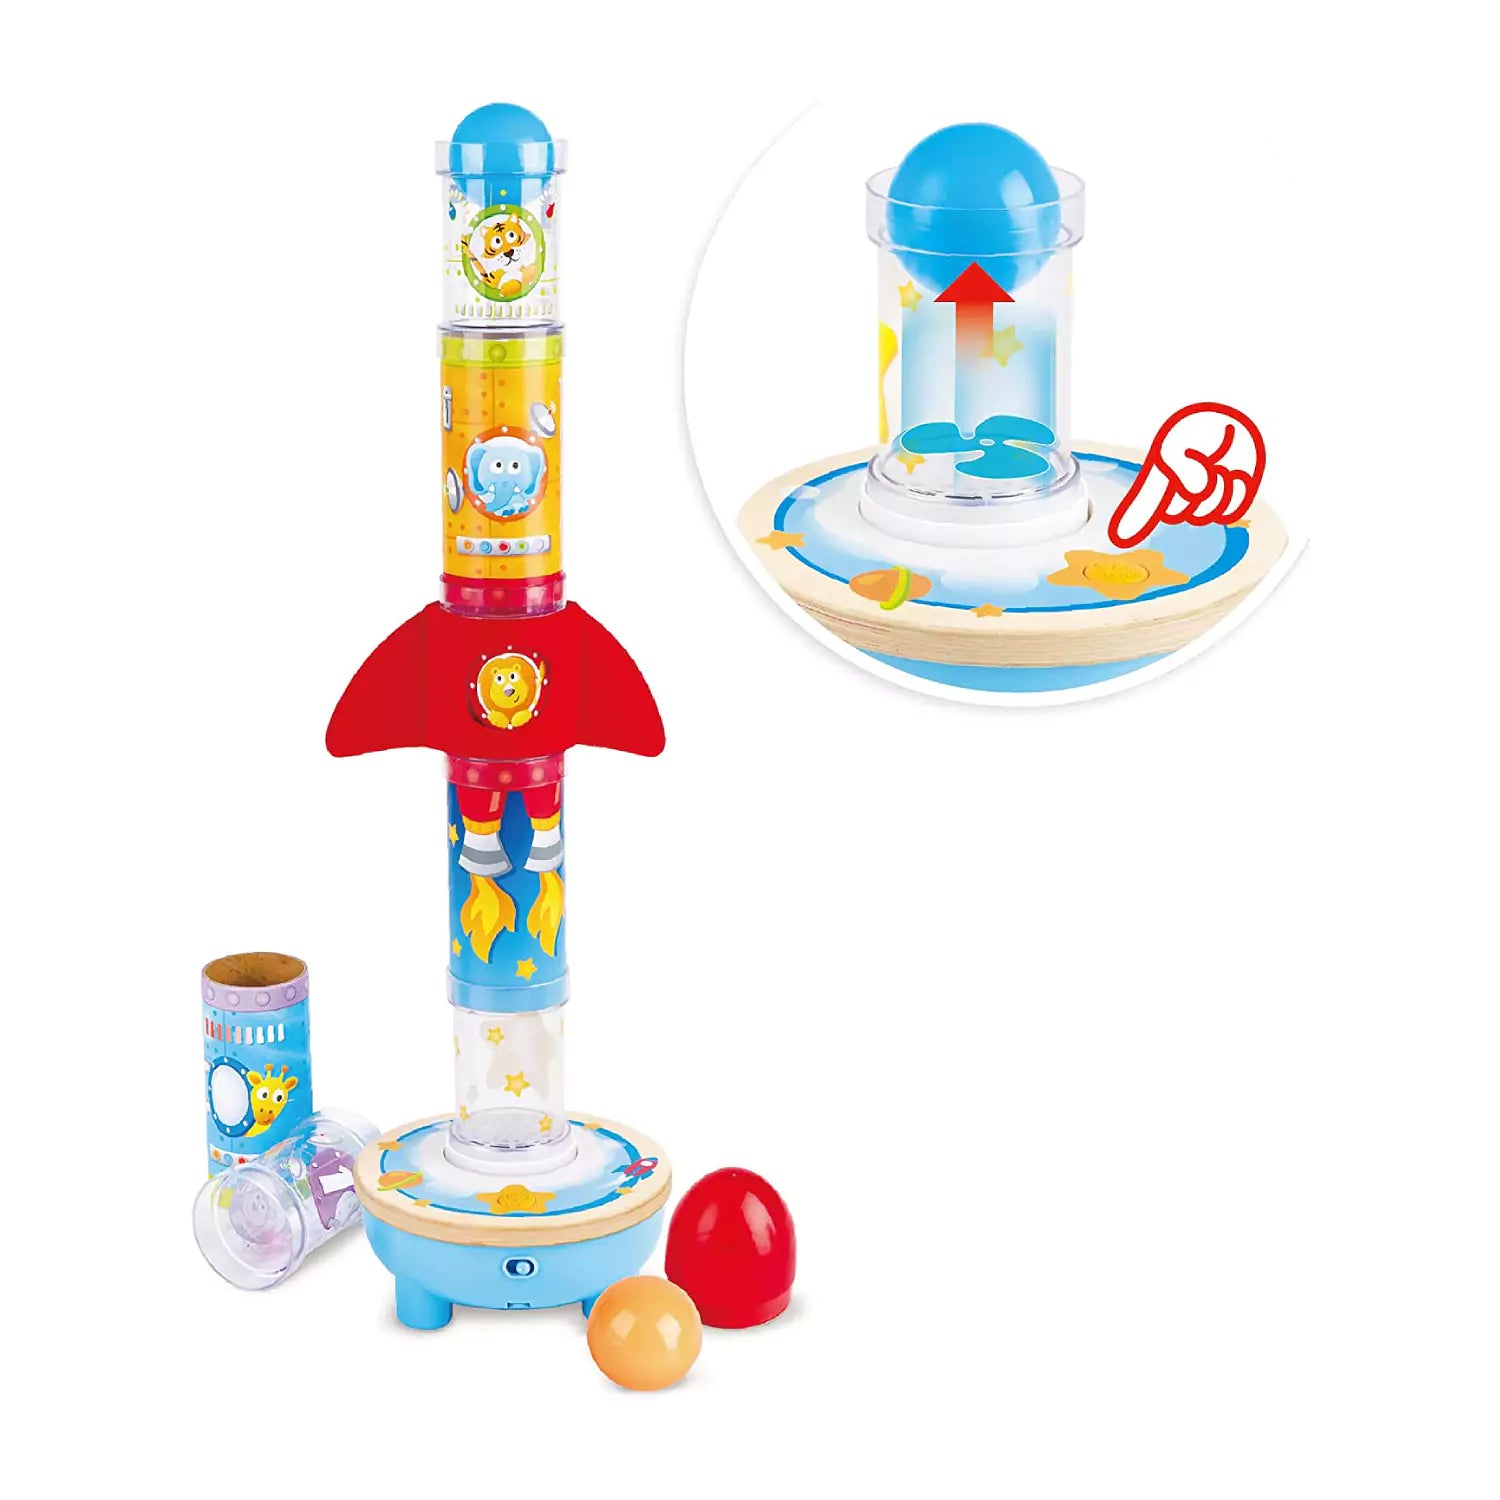 An image of Kids Stacking Toy - Fun Educational Toy for All Ages